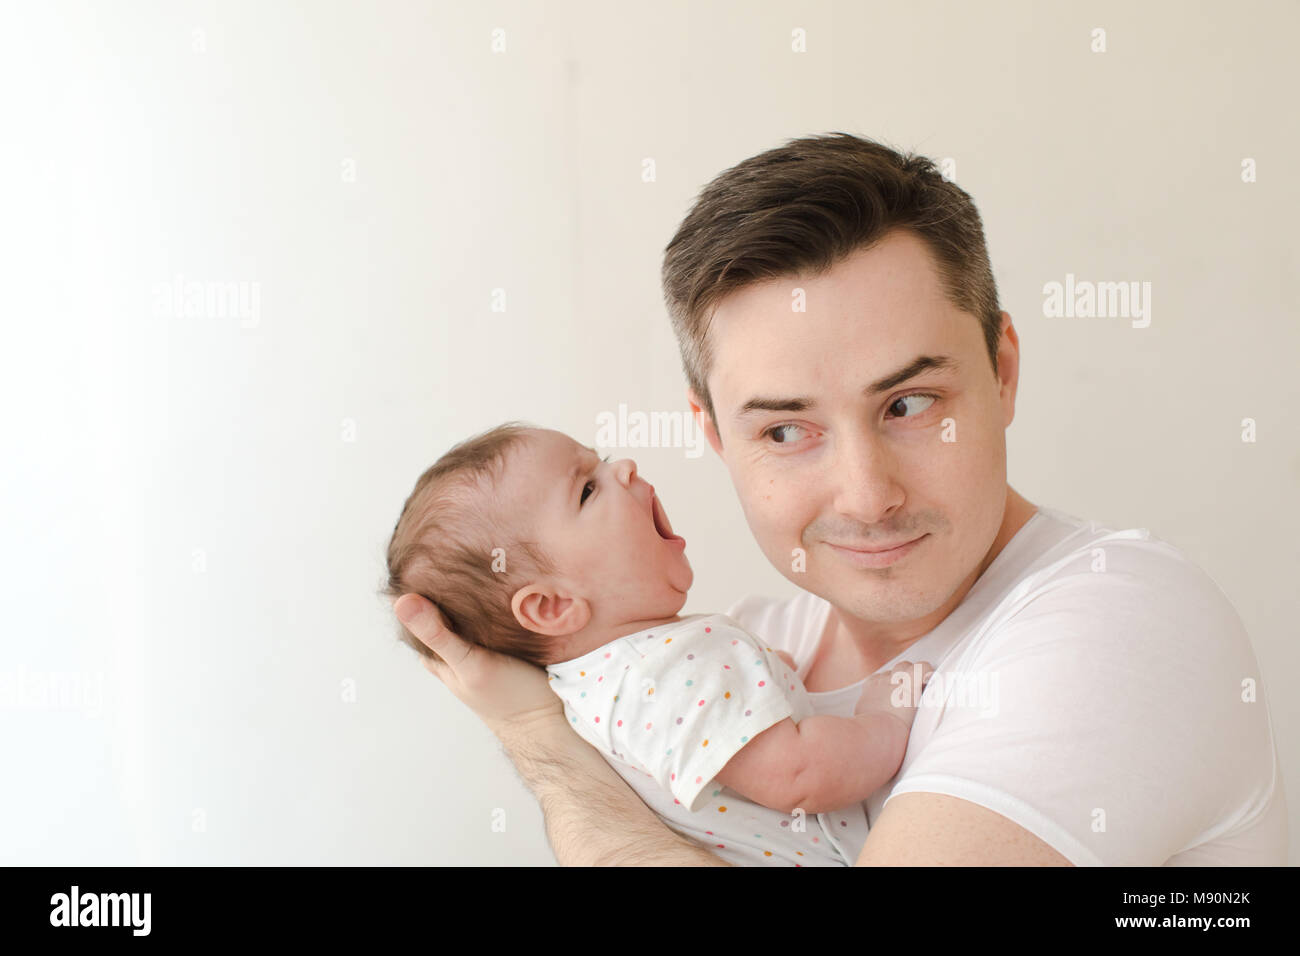 Cheerful man with screaming baby Stock Photo